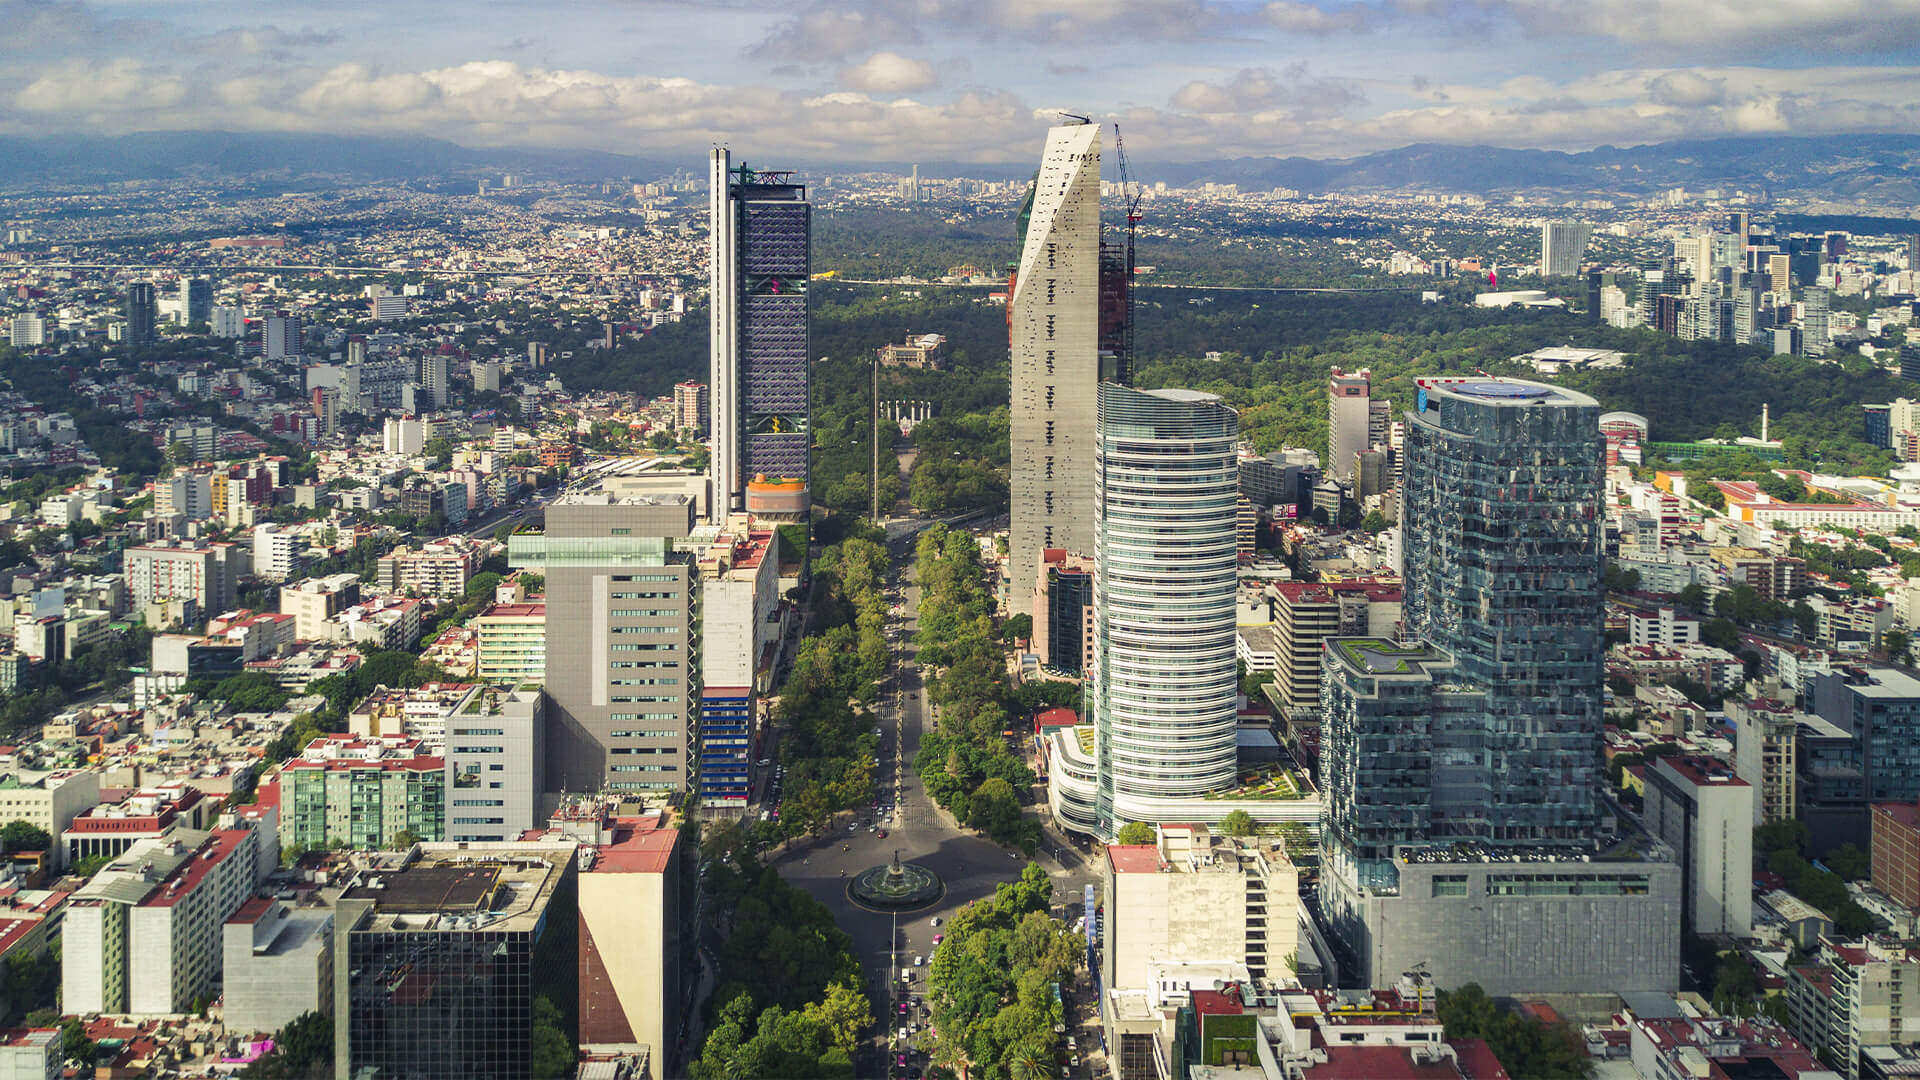 Mexico City centre during the day